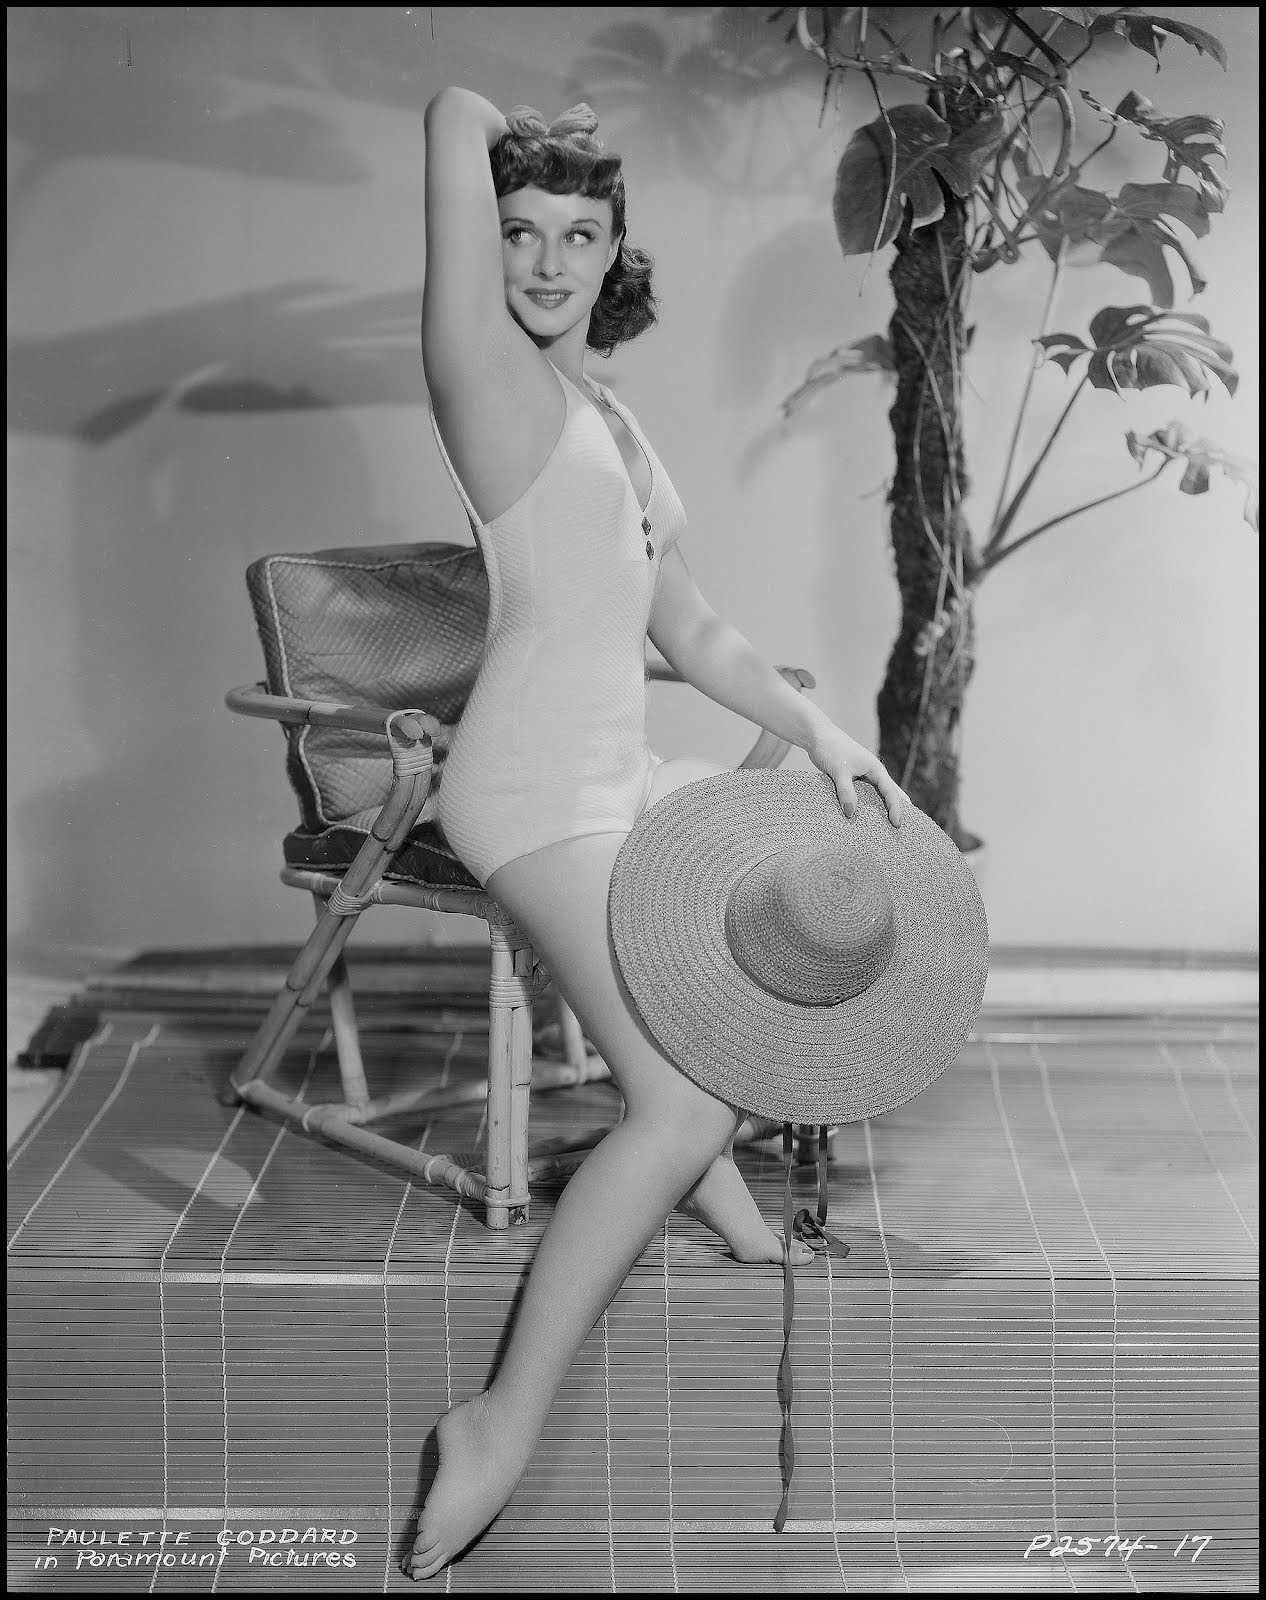 51 Hottest Paulette Goddard Bikini Pictures Which Are Inconceivably Beguiling 172